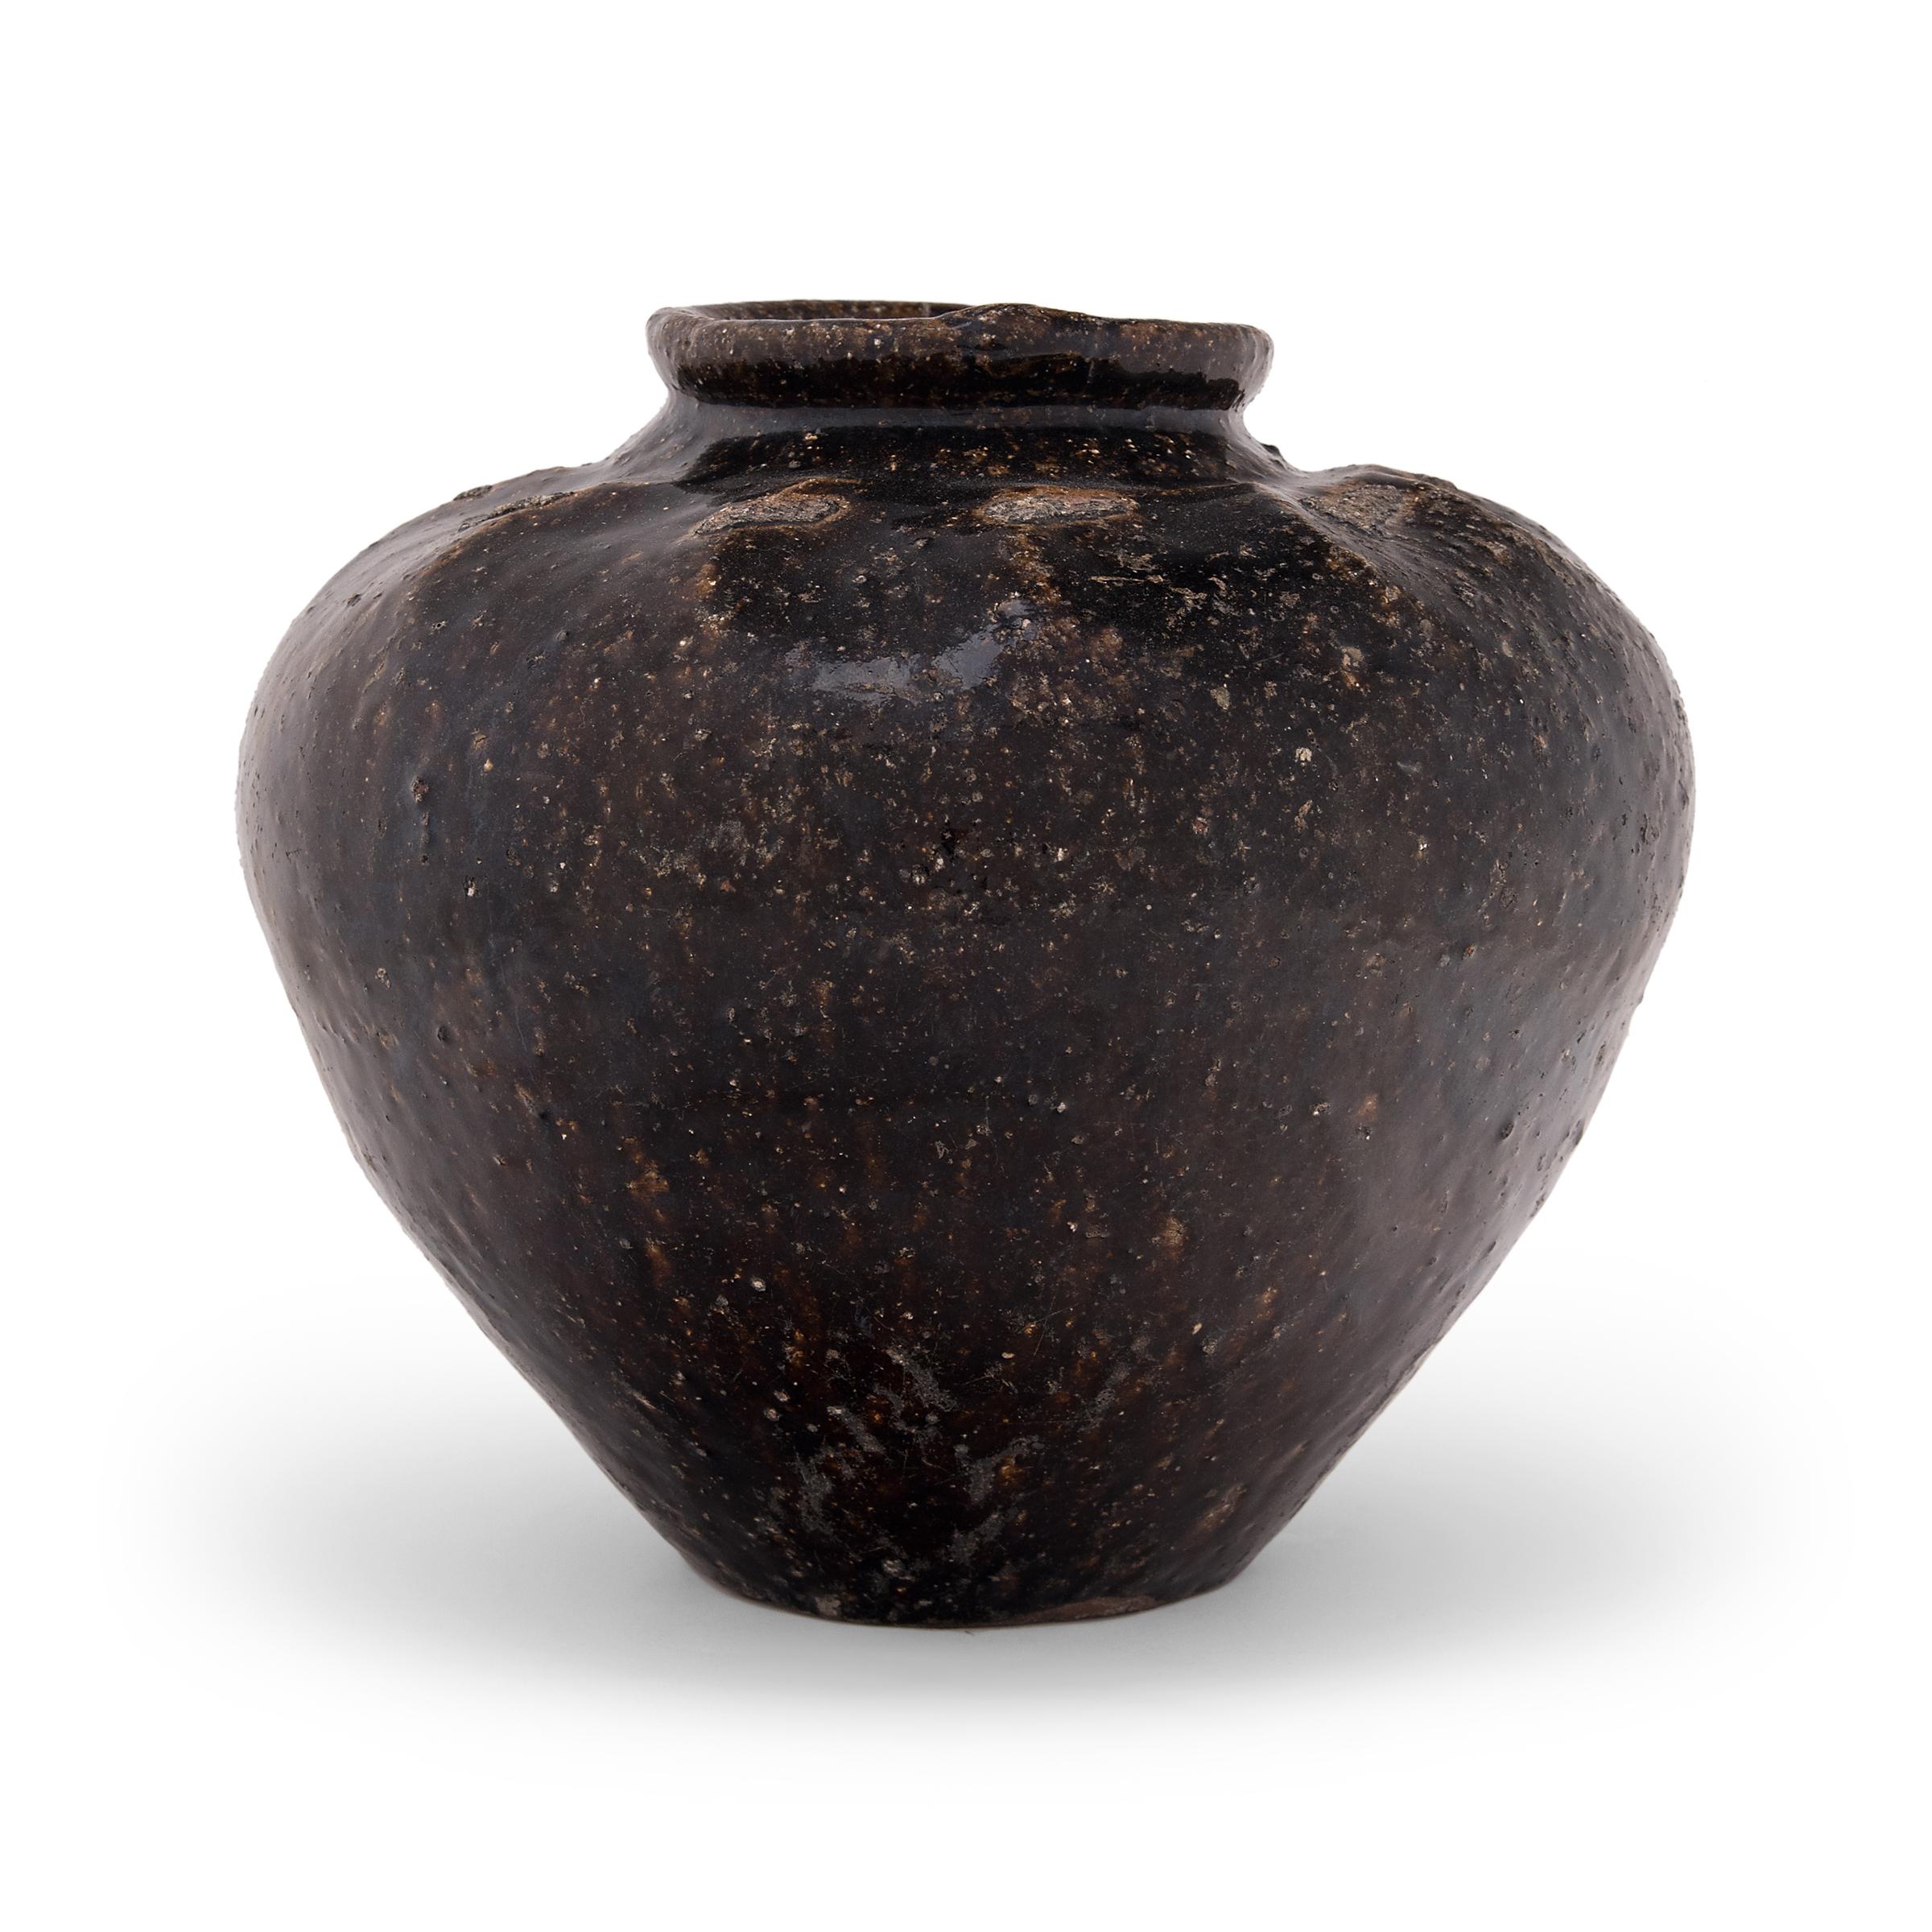 Originally used for salt pickling foods in a provincial kitchen, this early 20th century stoneware jar from southern China is coated inside and out with a dark brown glaze. The jar has a tapered form that narrows at the base and high shoulders